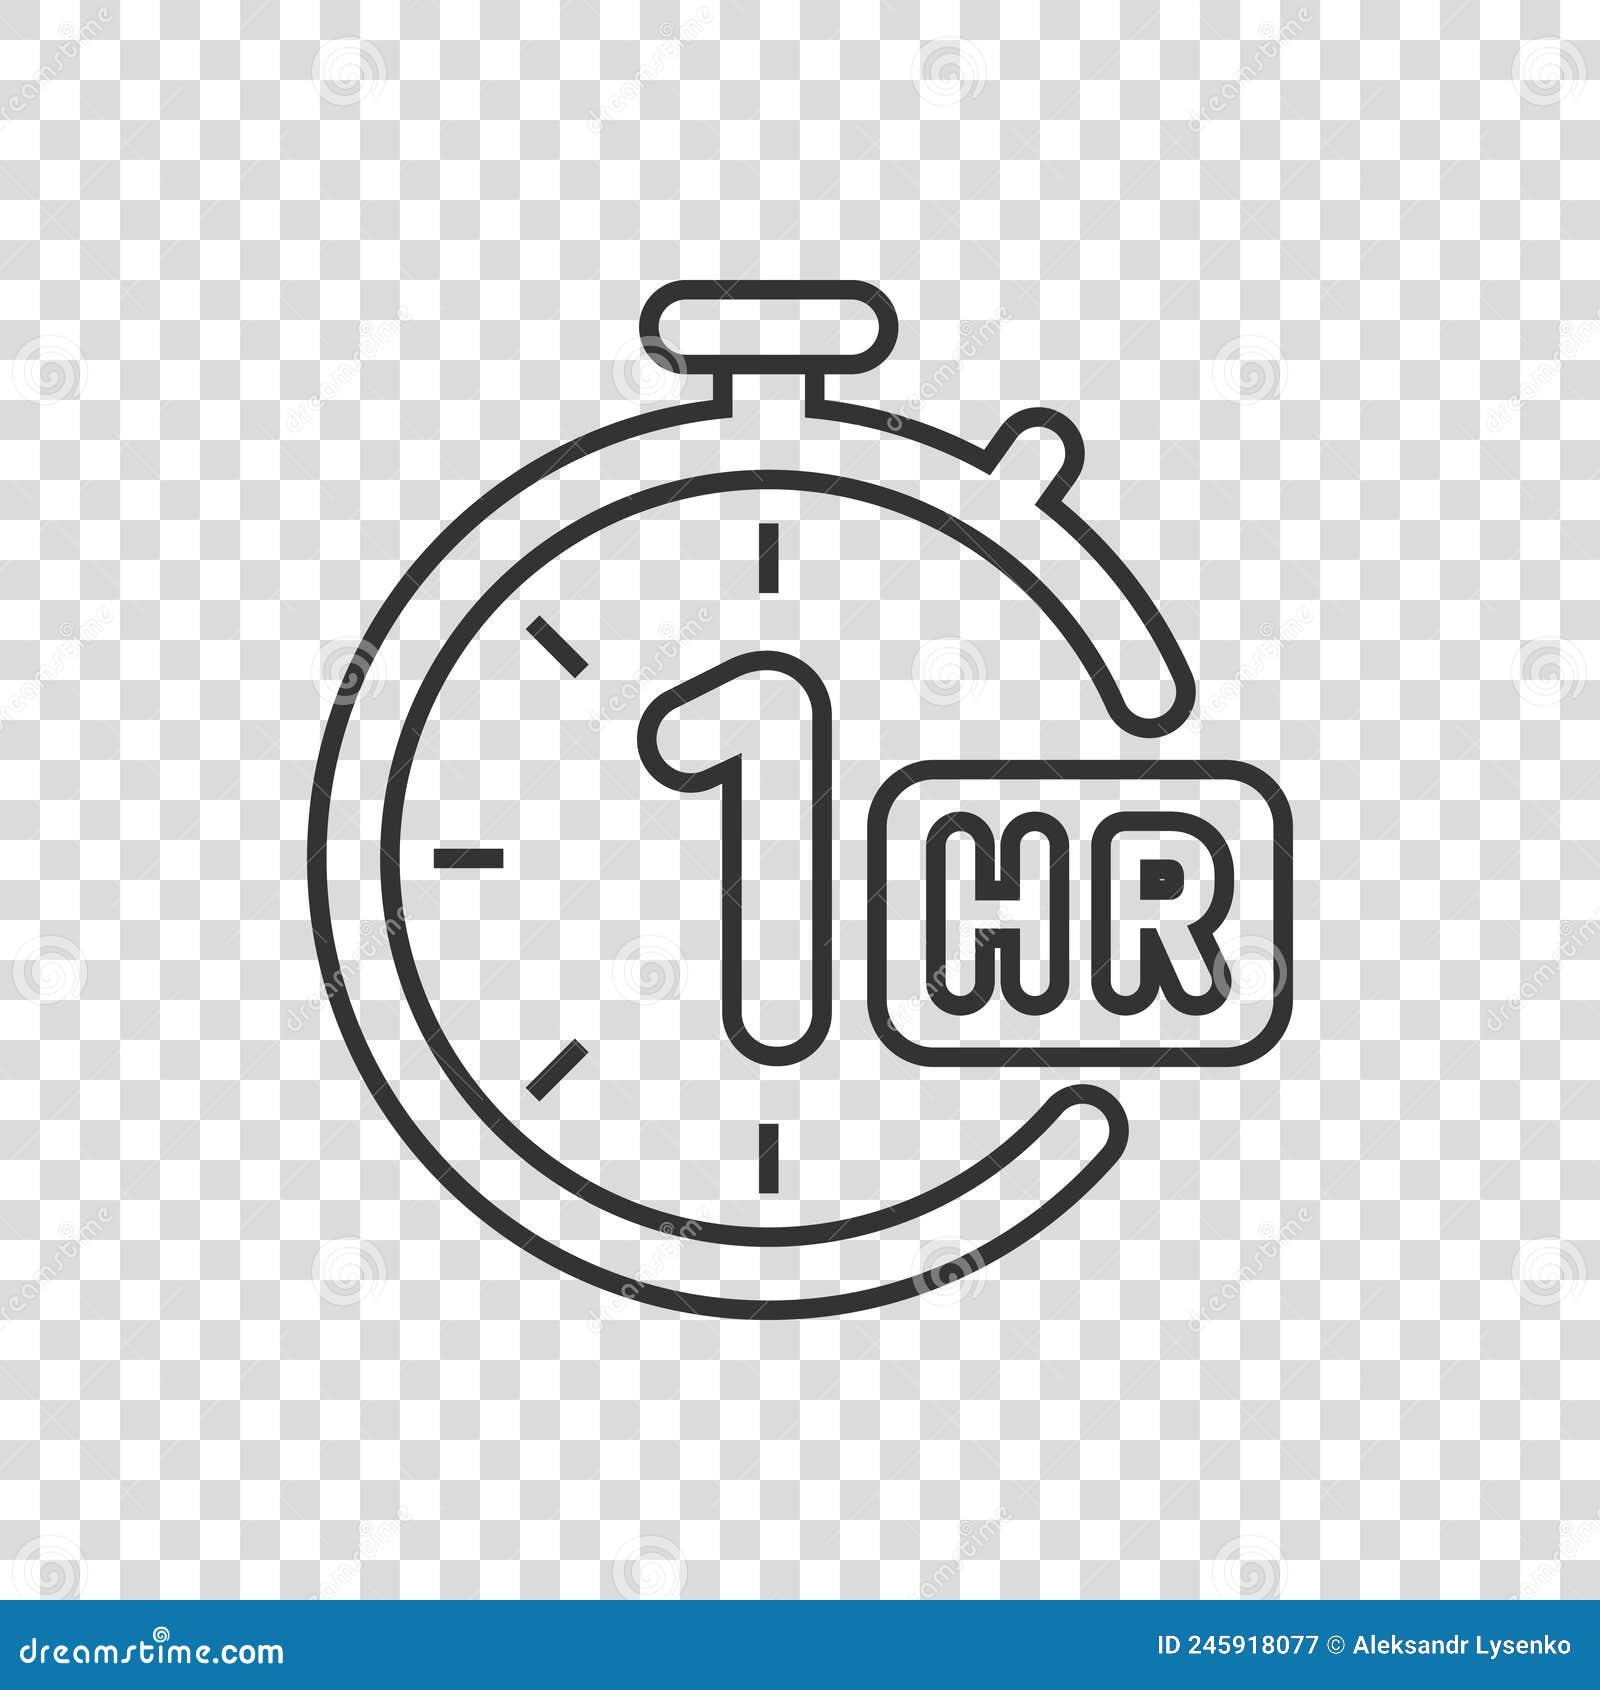 https://thumbs.dreamstime.com/z/hour-clock-icon-flat-style-timer-countdown-vector-illustration-isolated-background-time-measure-sign-business-concept-245918077.jpg